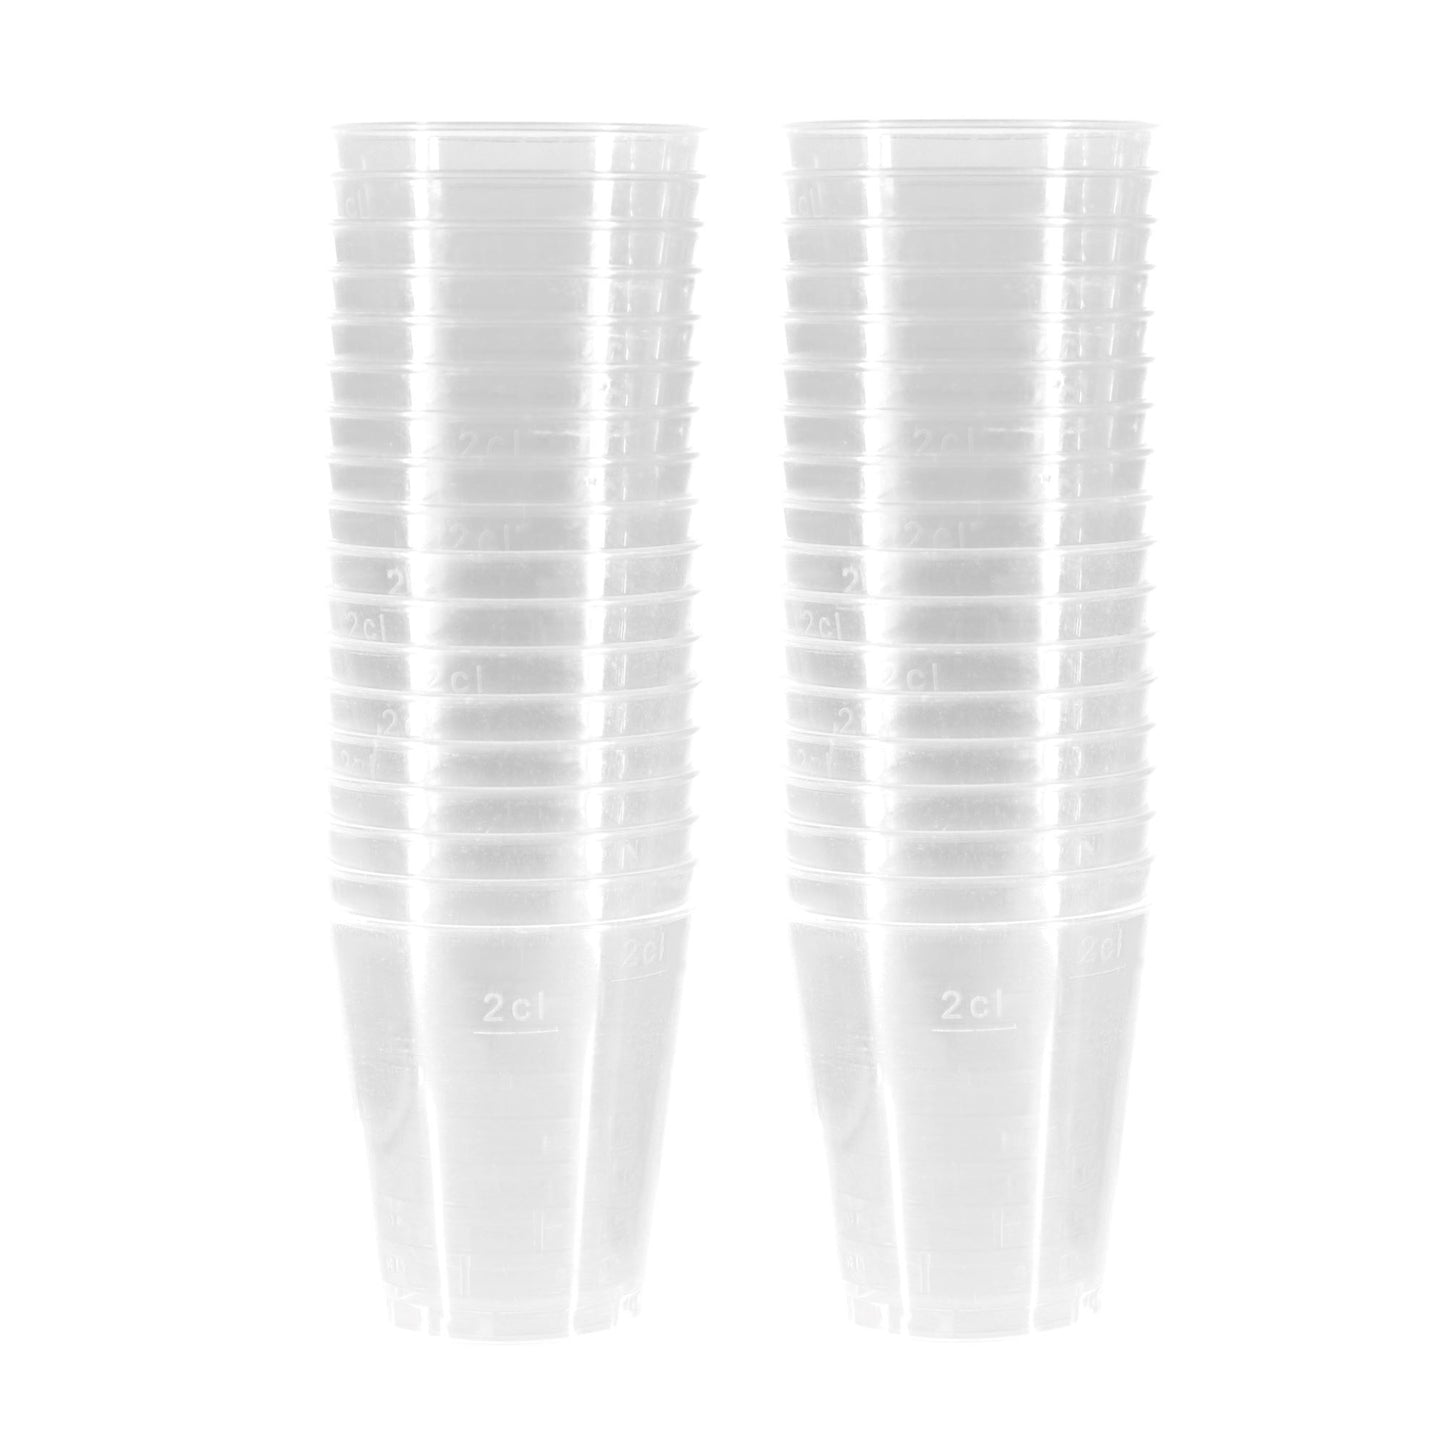 Pack of 50 x Clear Shot Glasses Biodegradable Material Plastic 3cl 30ml Stackable Liquor, Spirits, Food Sampling, Parties, Jelly Shots